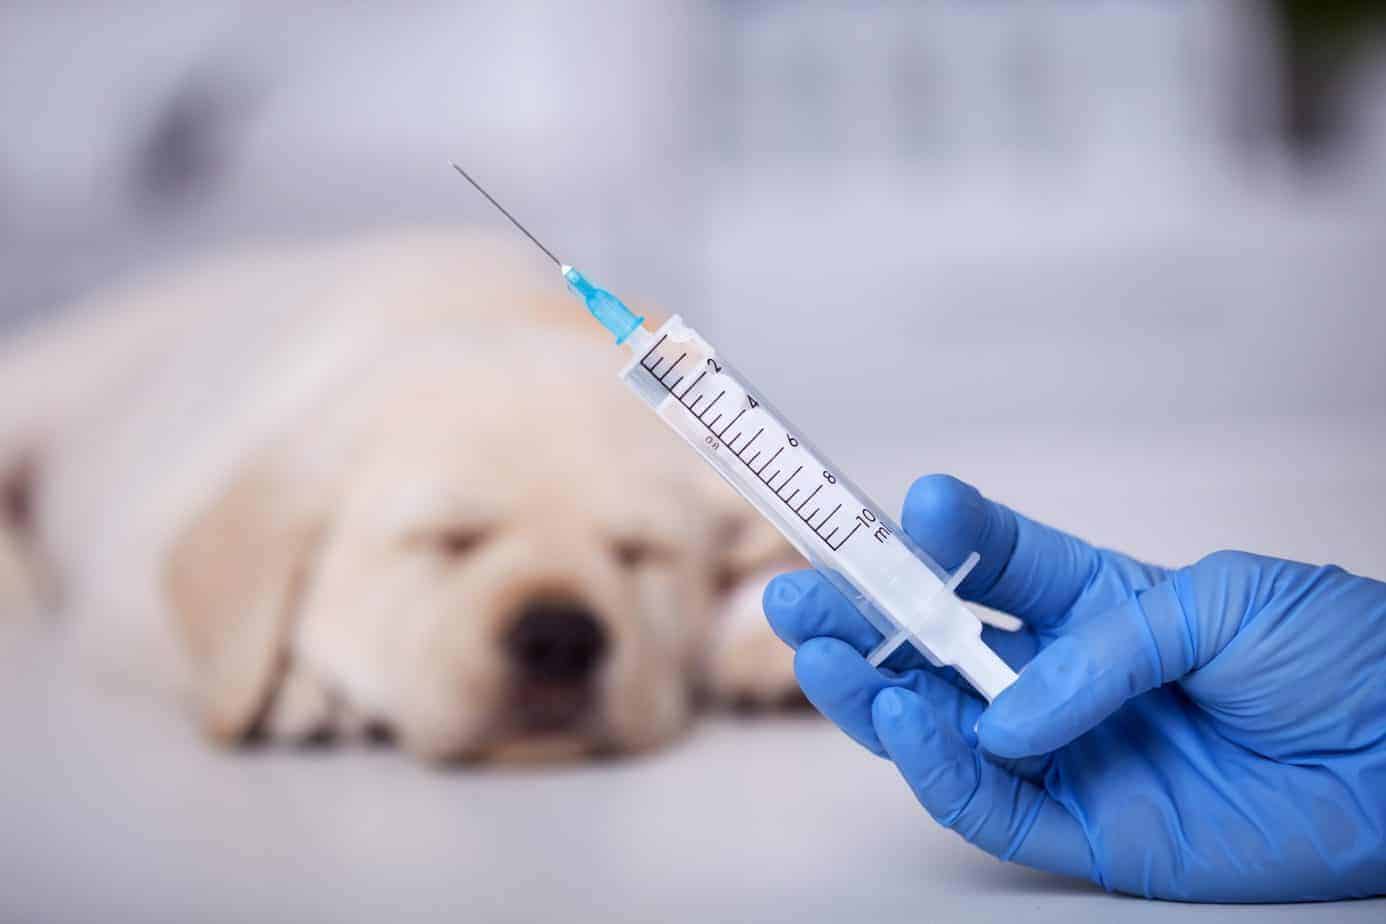 Dog vaccines Rabies, Parvo, Distemper, and more